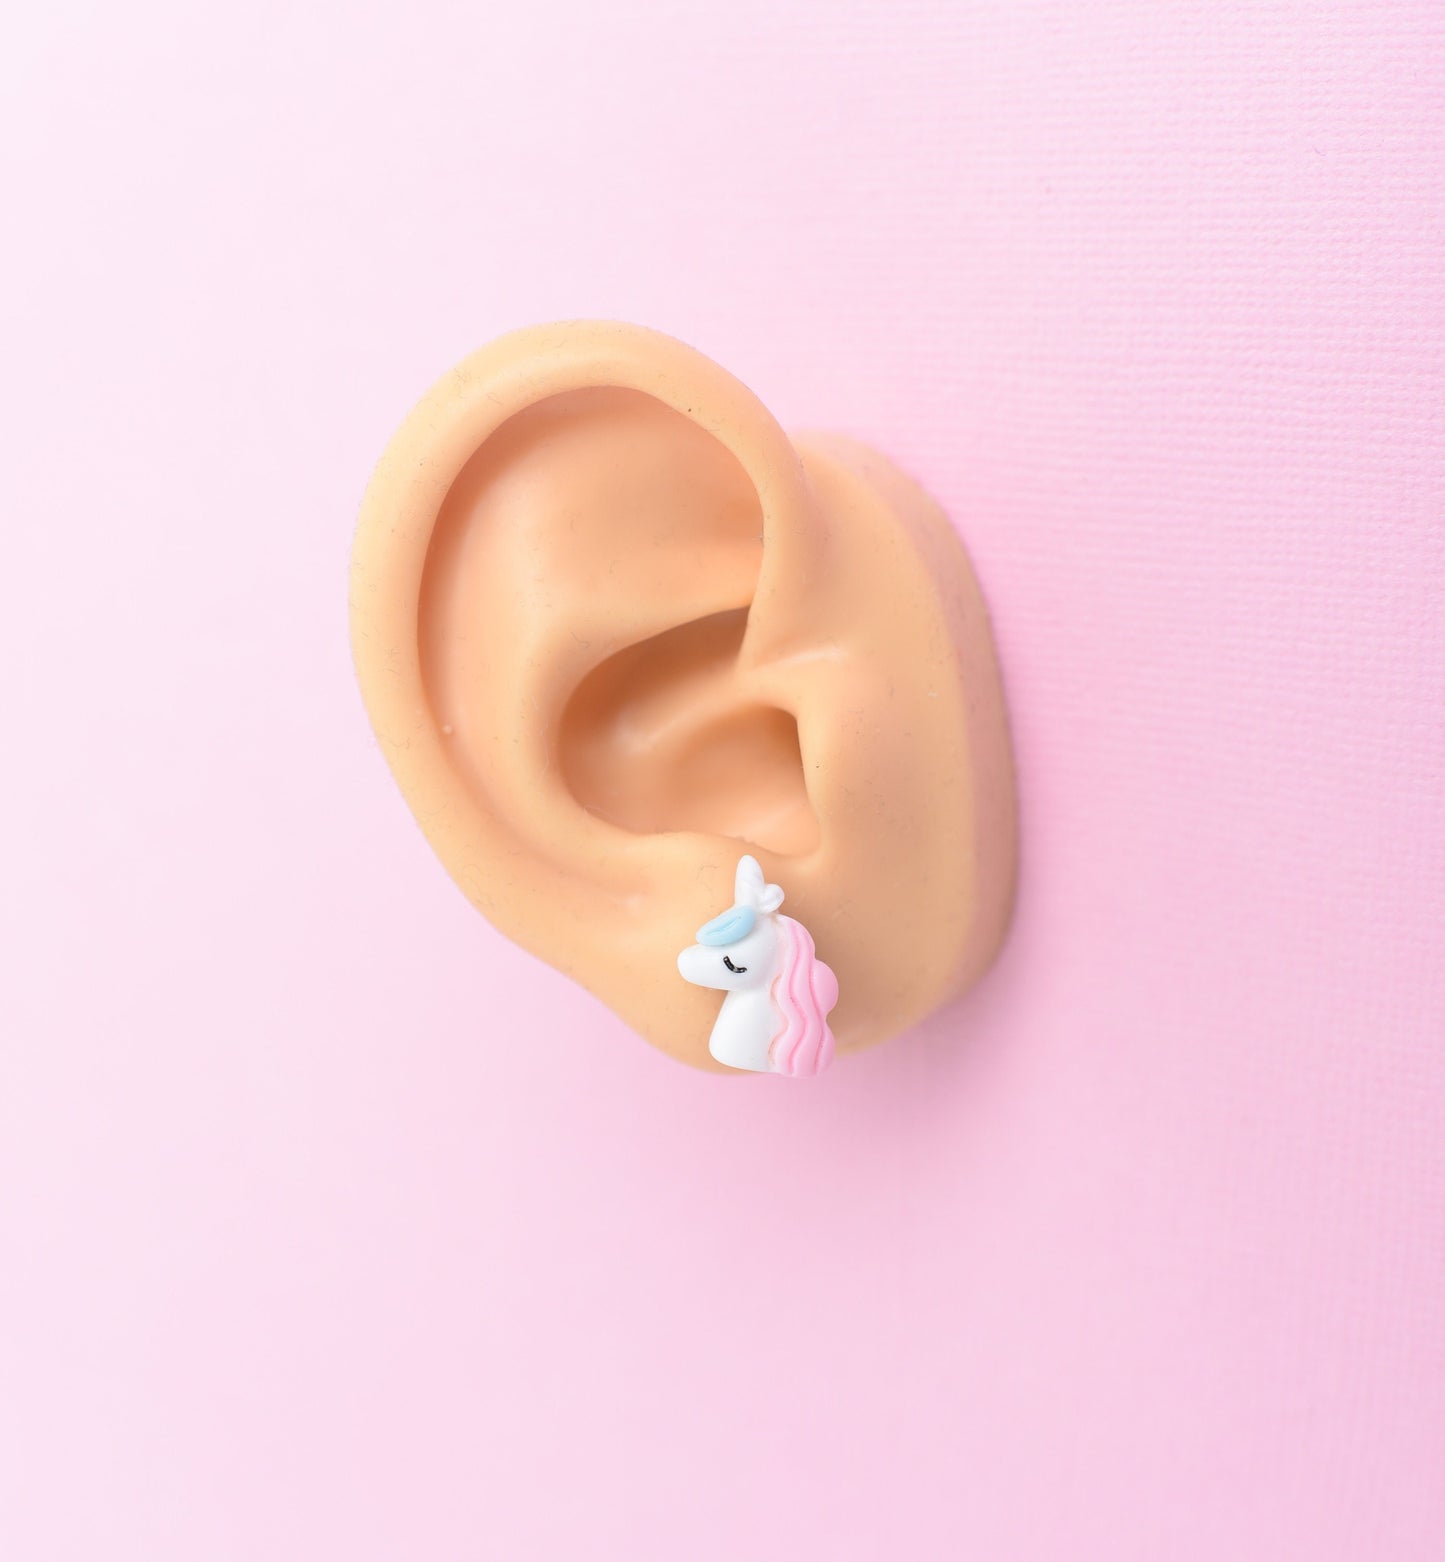 Pink Pig, Unicorn, and Bunny Animal Earring Trio with Titanium Posts